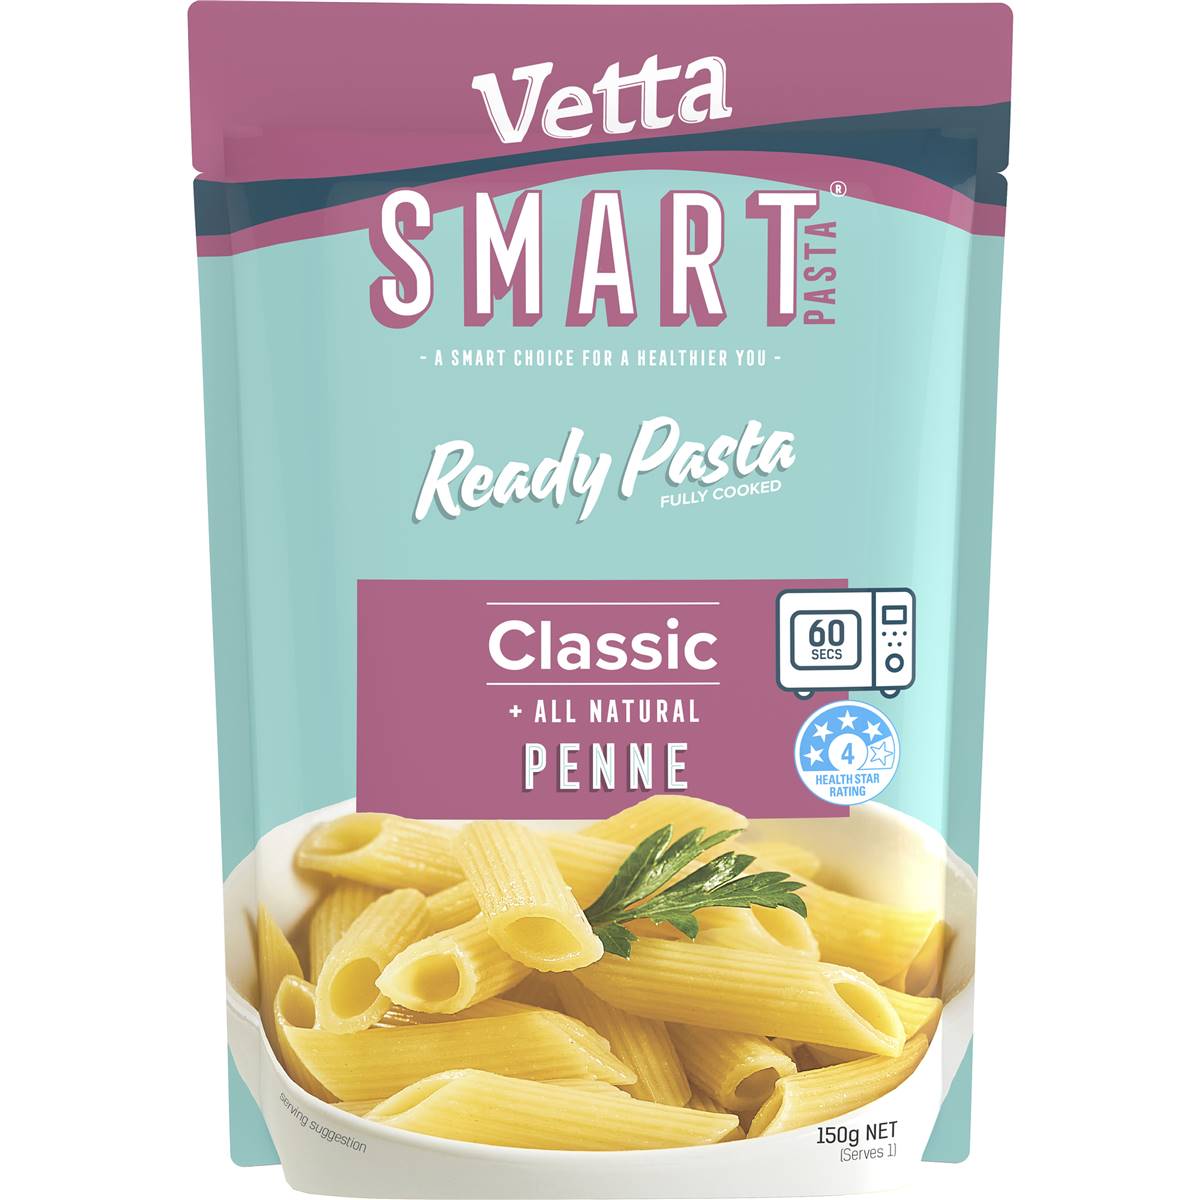 Calories in Vetta Microwave Ready Pasta Classic Penne